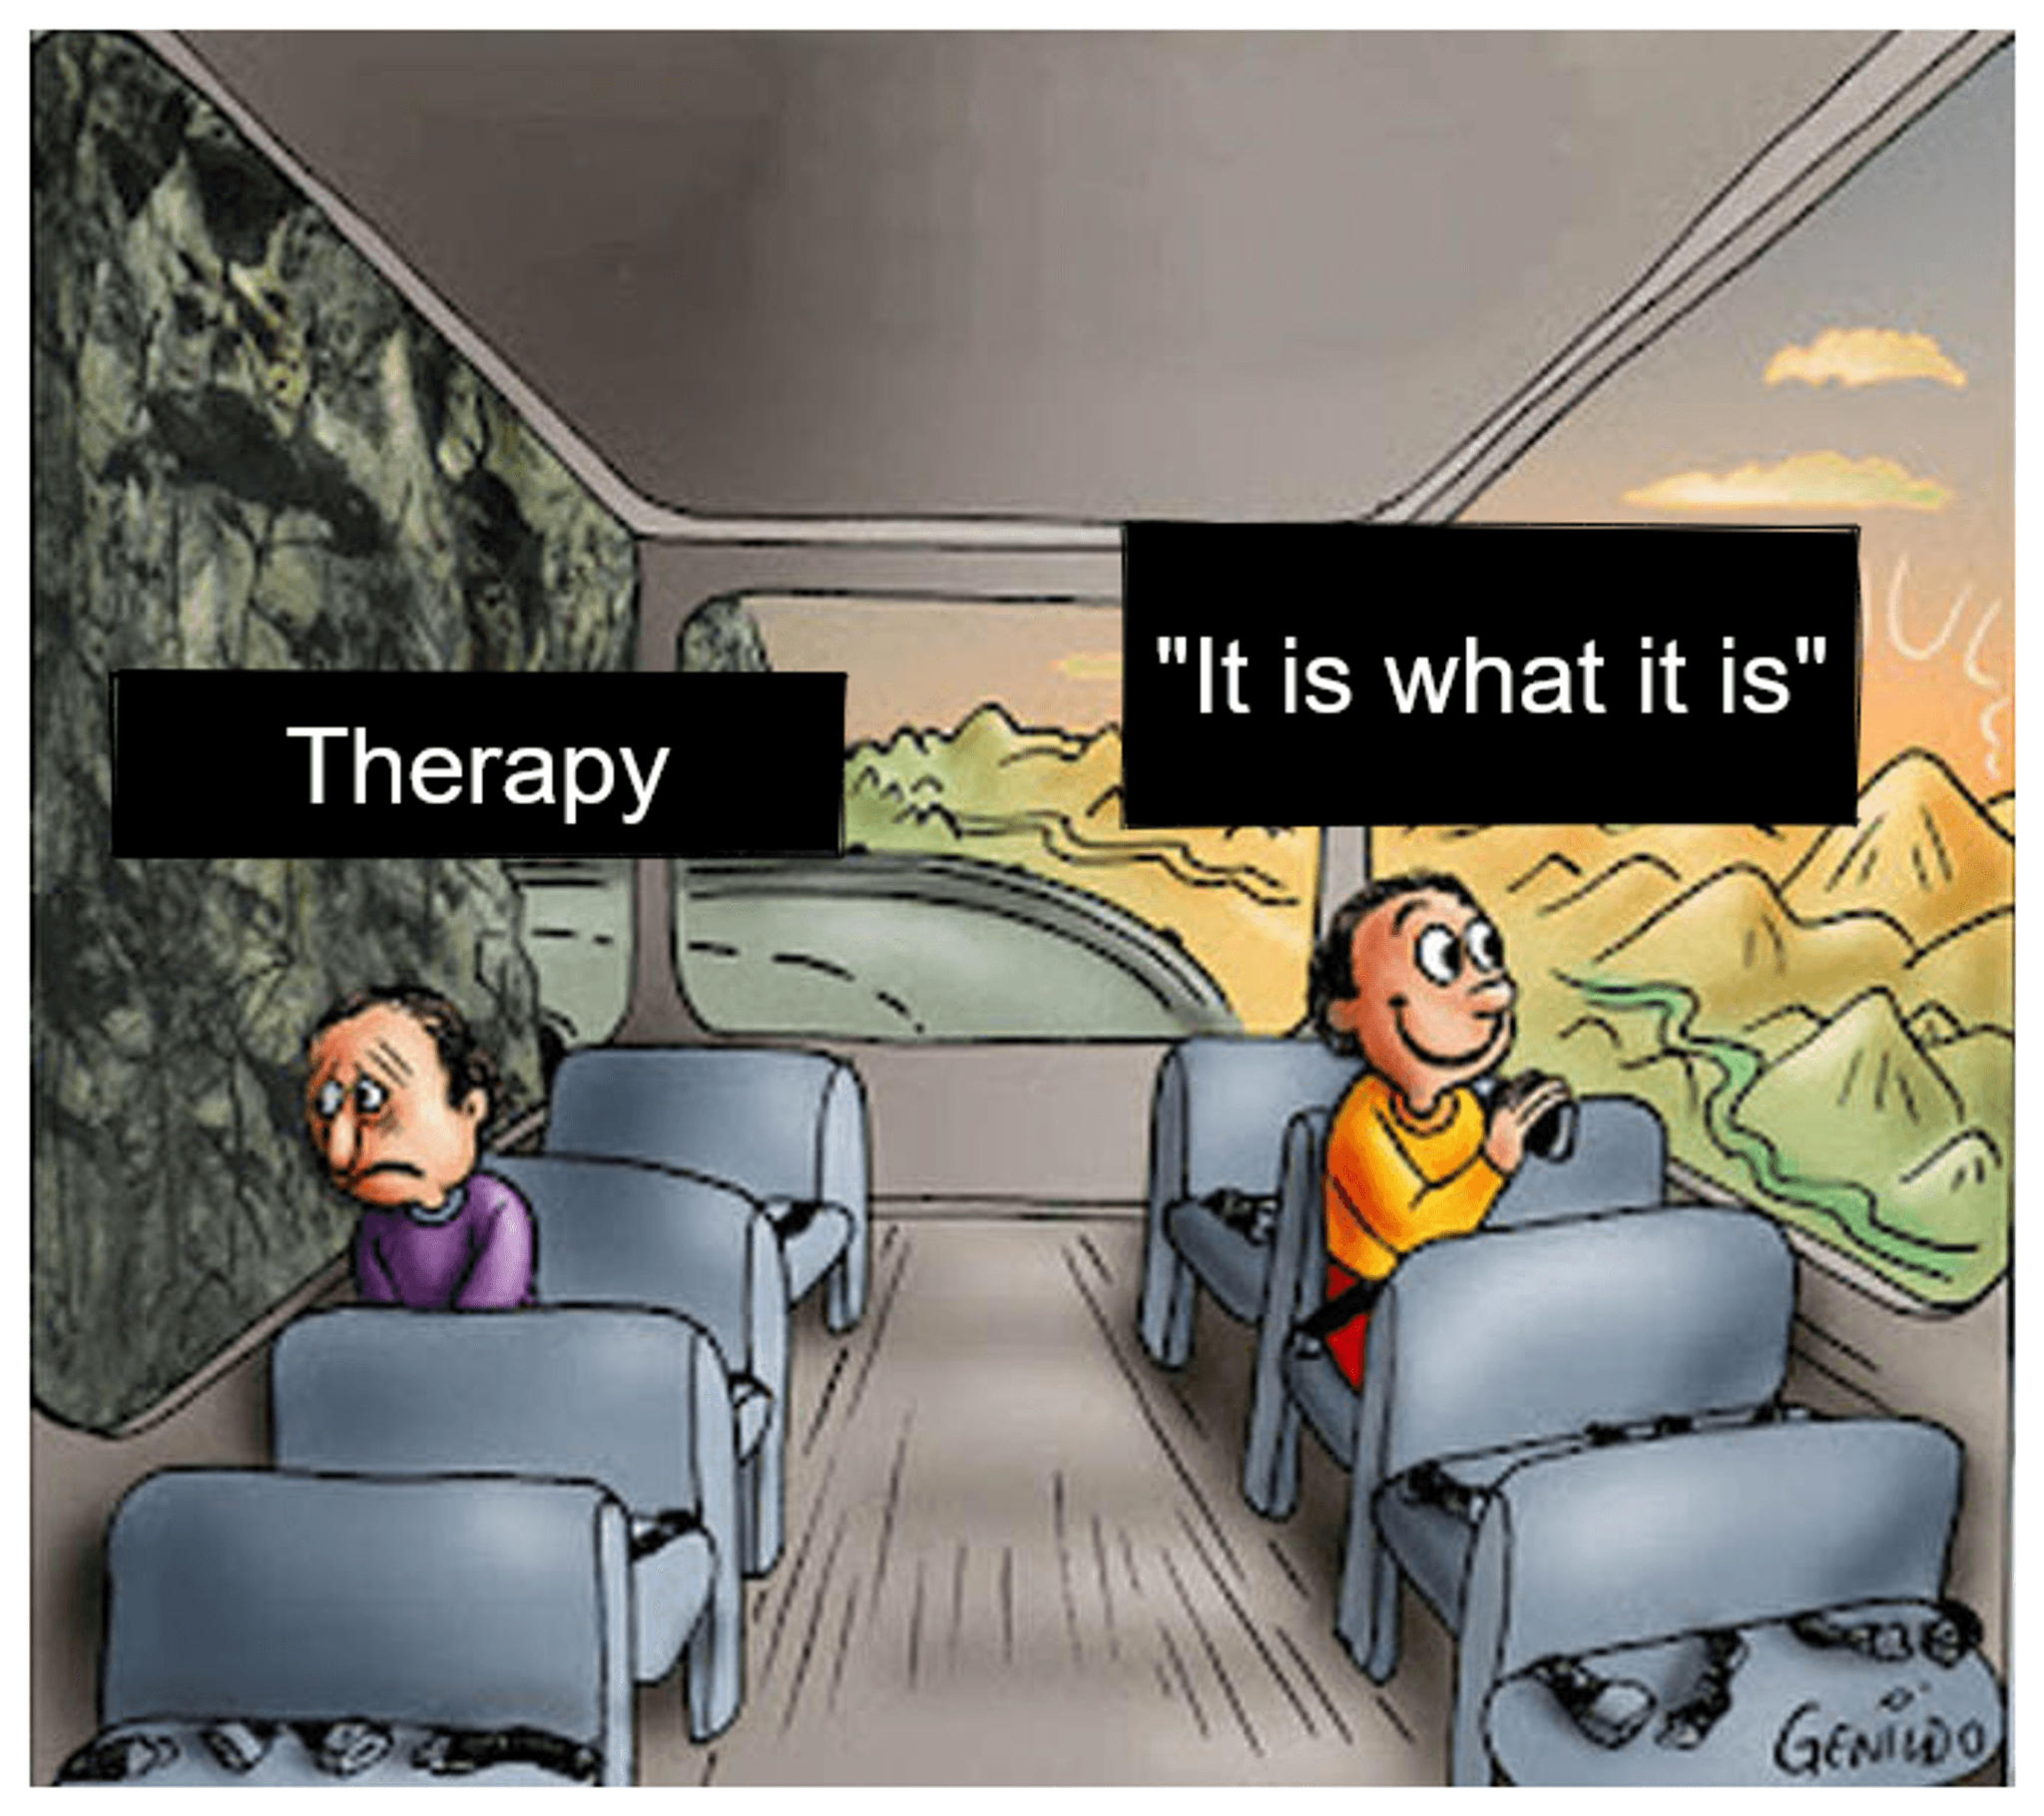 Two guys in a bus meme, the sad person going to therapy while the happy person says It is what it is.